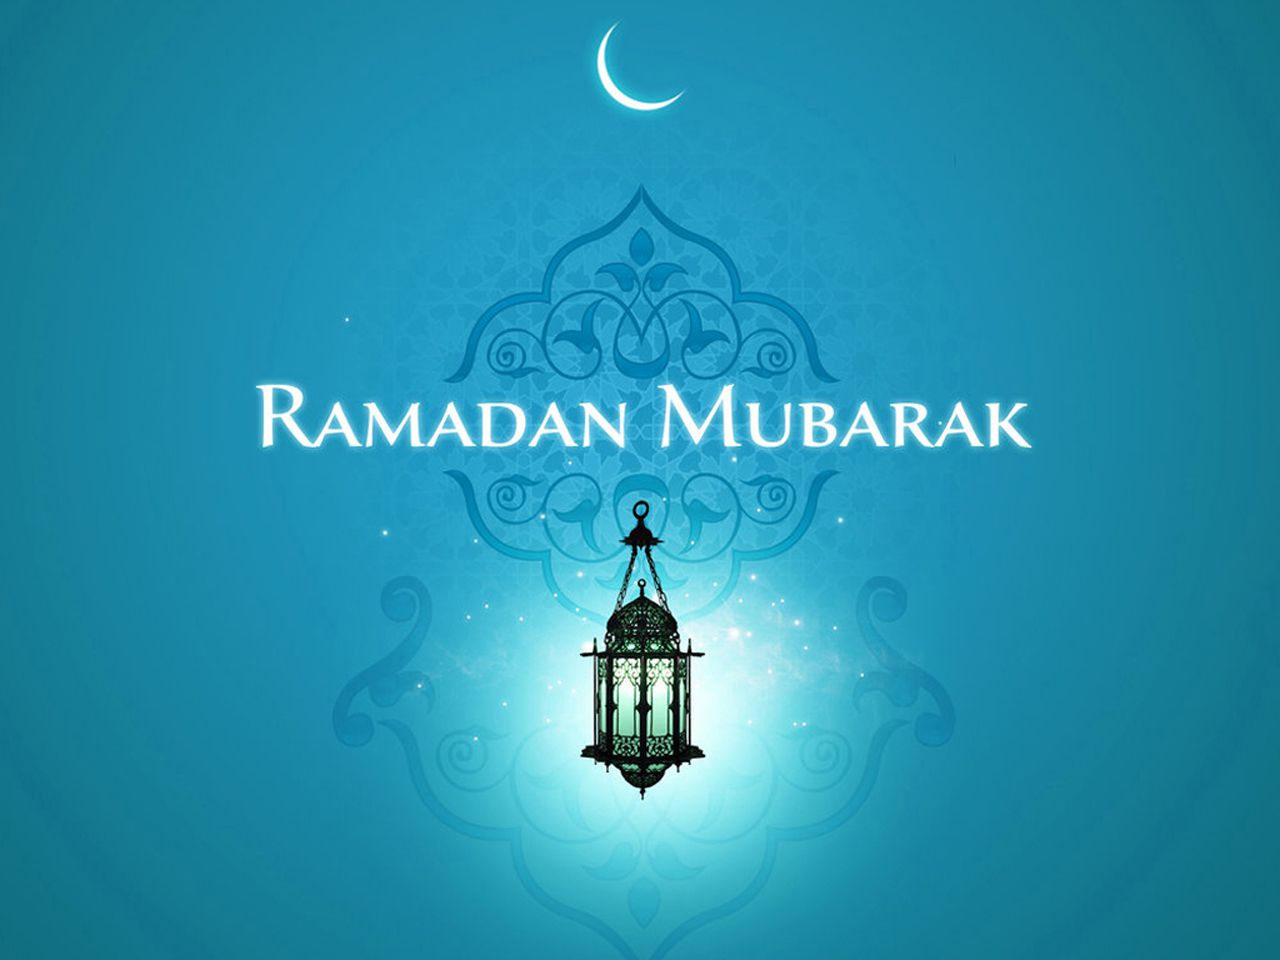 Best Ramadan Greeting Card Designs and Backgrounds   CGfrog